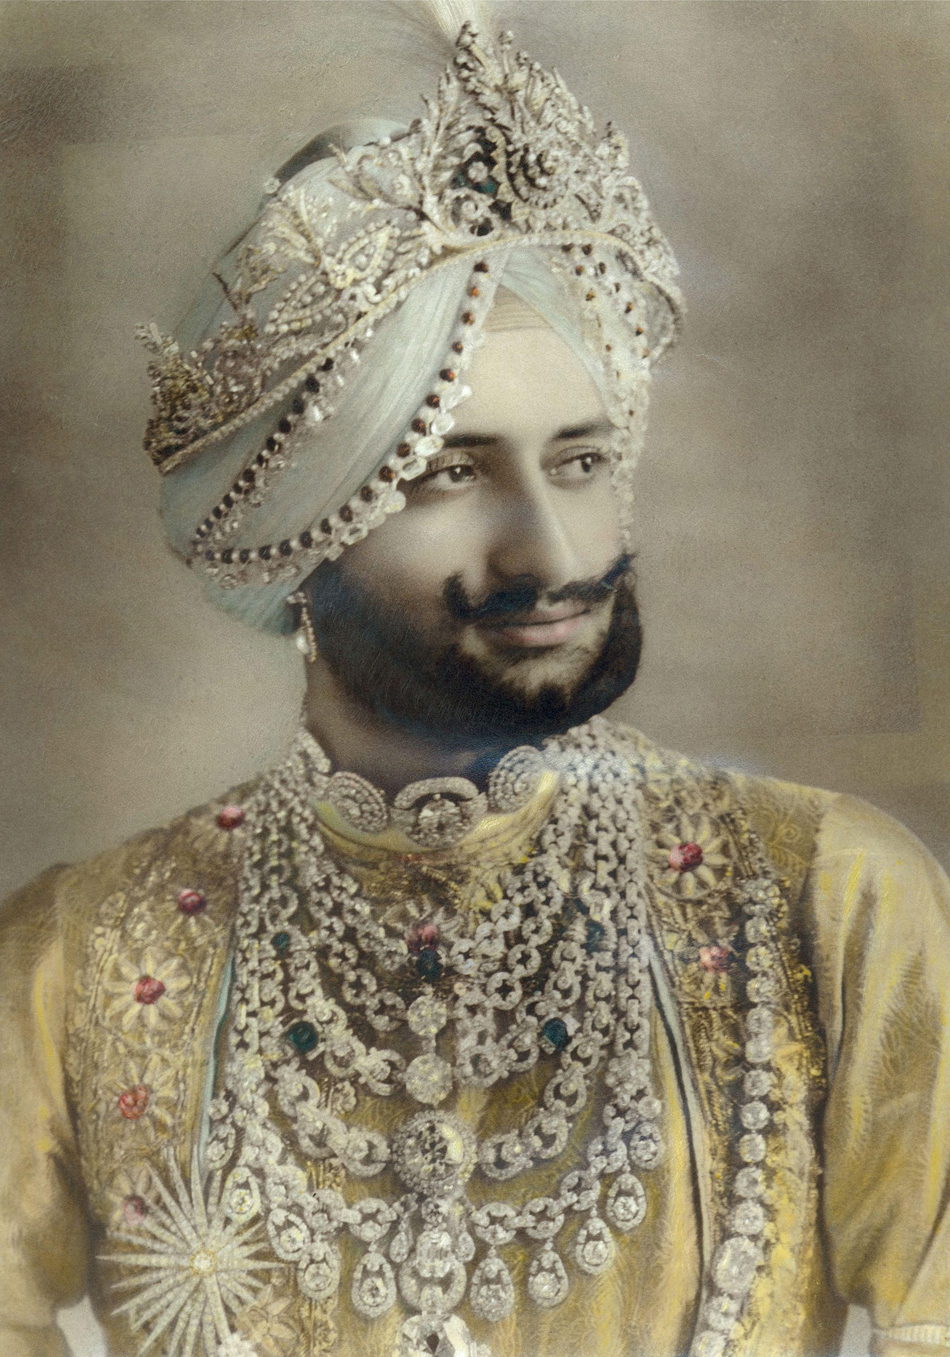 The Maharajah of Patiala In this 1928 photograph from the New York Herald, Sir Yadavindra Singh, Maharaja of Patiala, wears a platinum-and-diamond ceremonial necklace created by Cartier for his father, Sir Bhupindar Singh. © Cartier Archives 